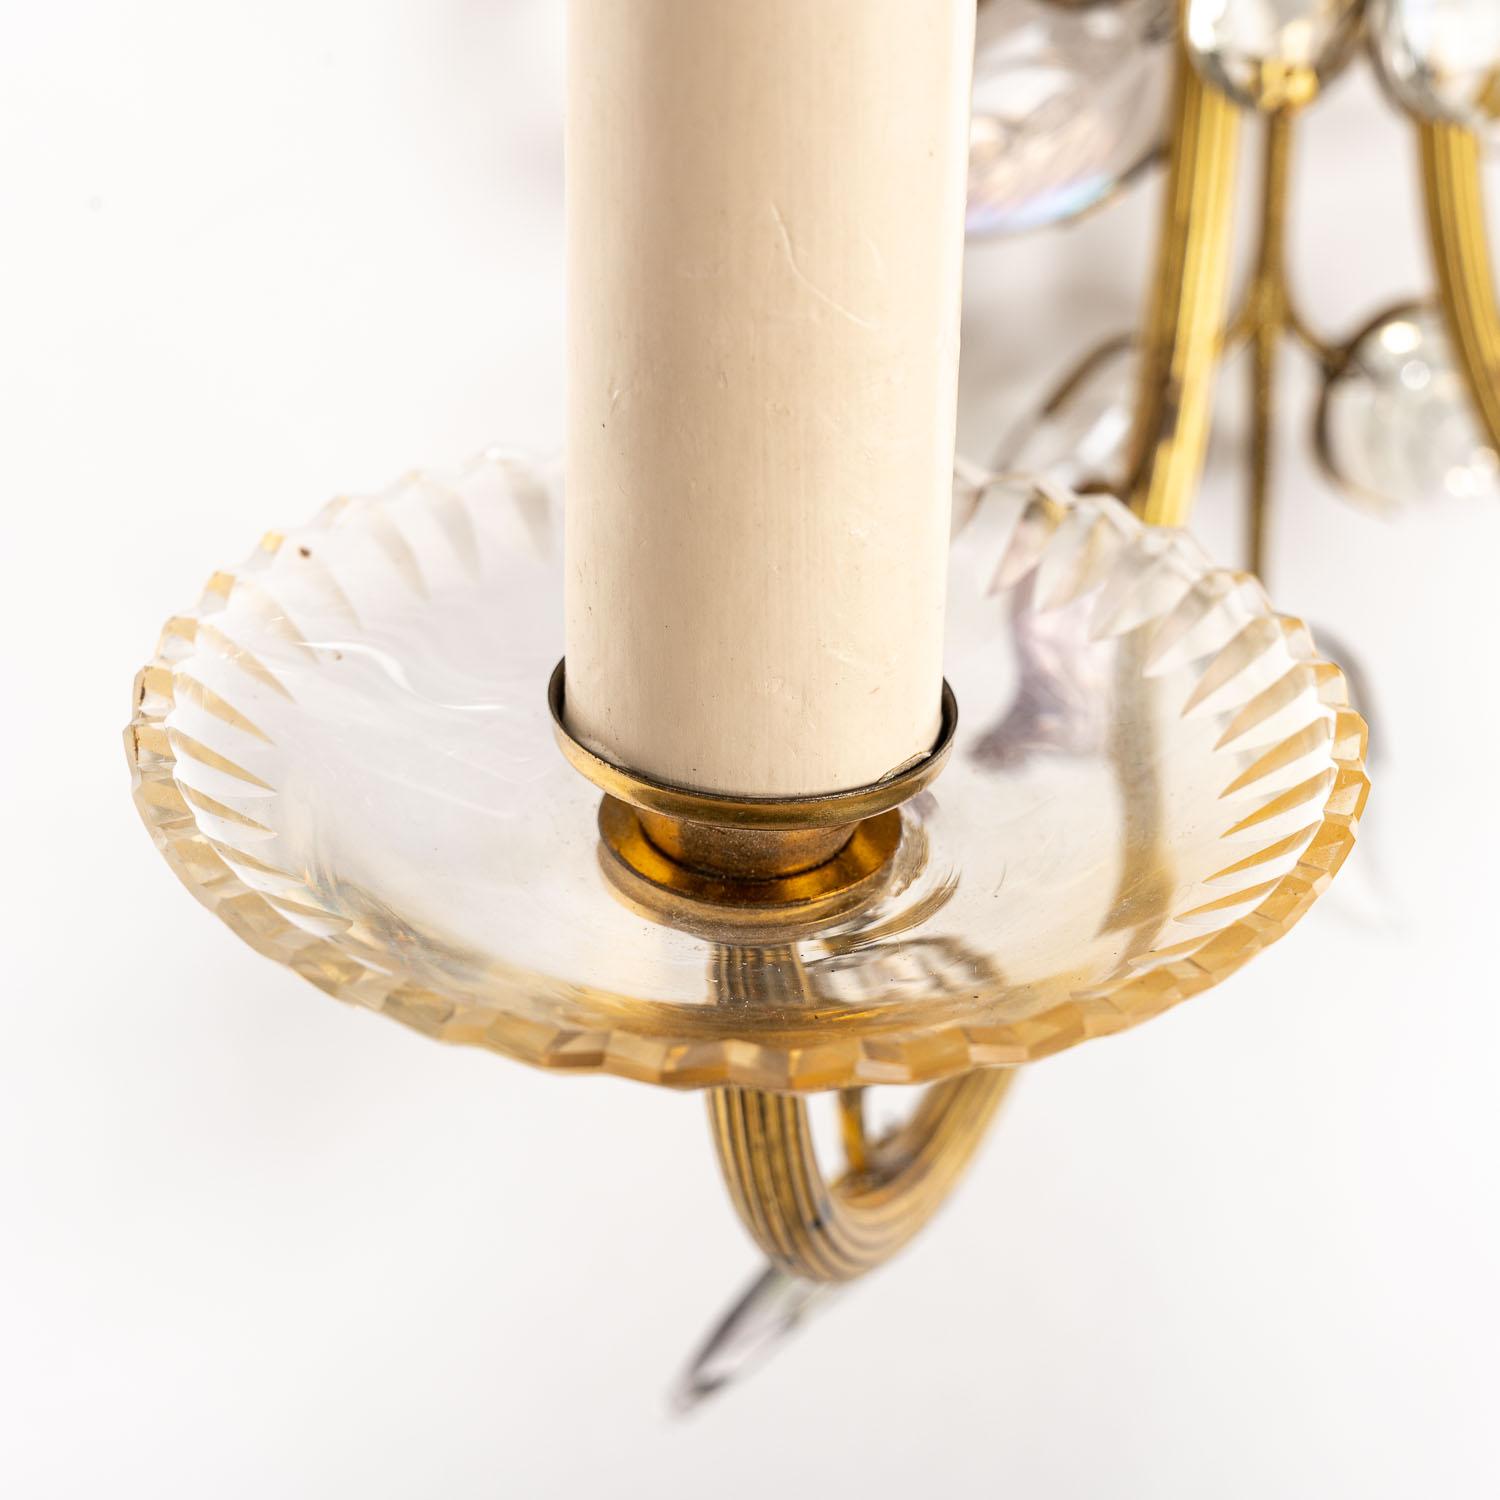 This stunning light attributed to Maison Baguès combines naturalistic design with ornate lighting. The decorative gilt-brass branches and base are the foundation for this florally-inspired piece. The central 'flower 'is an intricate mix of